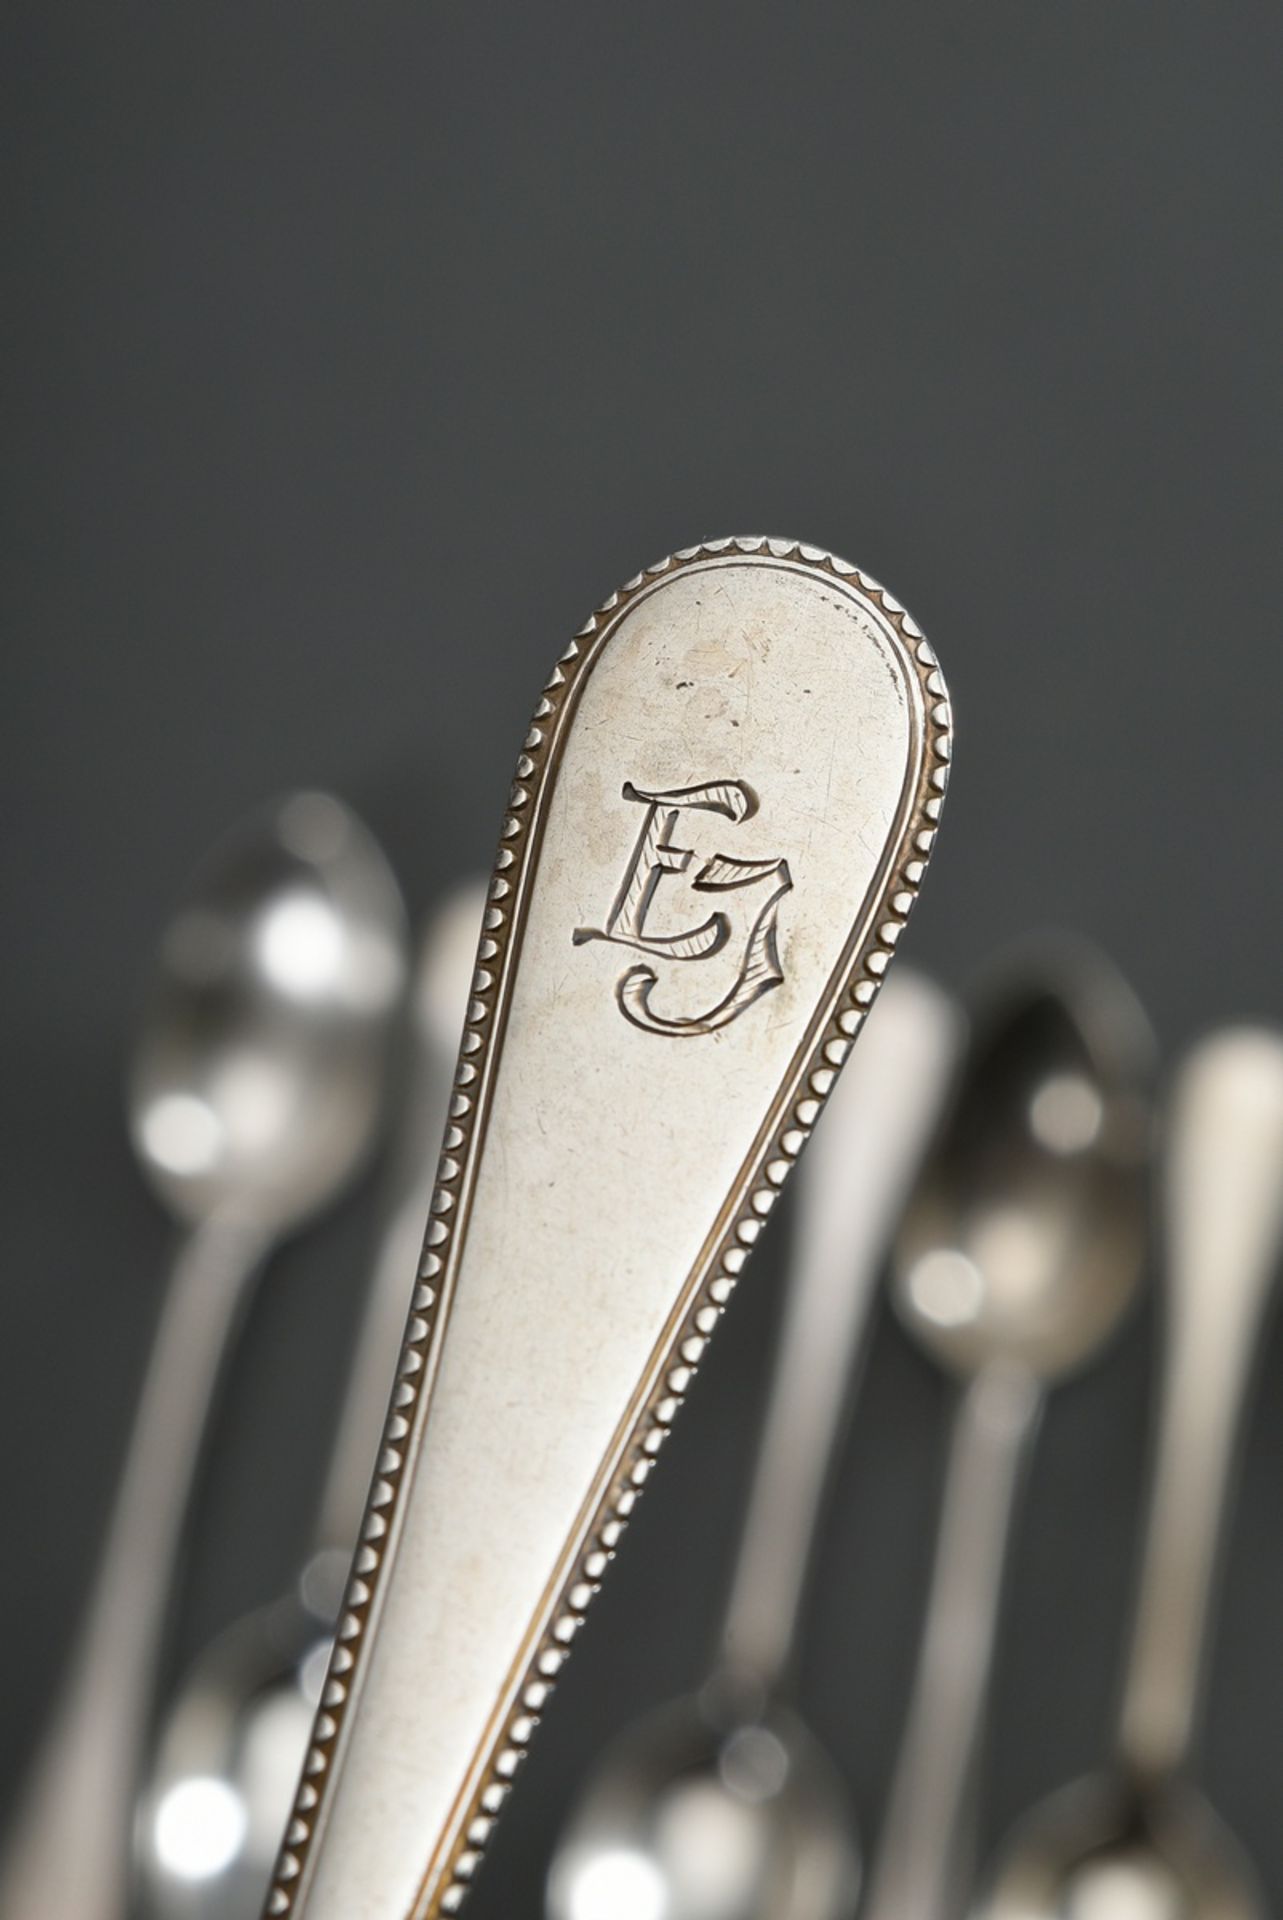 7 teaspoons with pearl pattern and monogram engraving "I", Wilkens & Söhne/ Bremen, jeweller's mark - Image 3 of 4